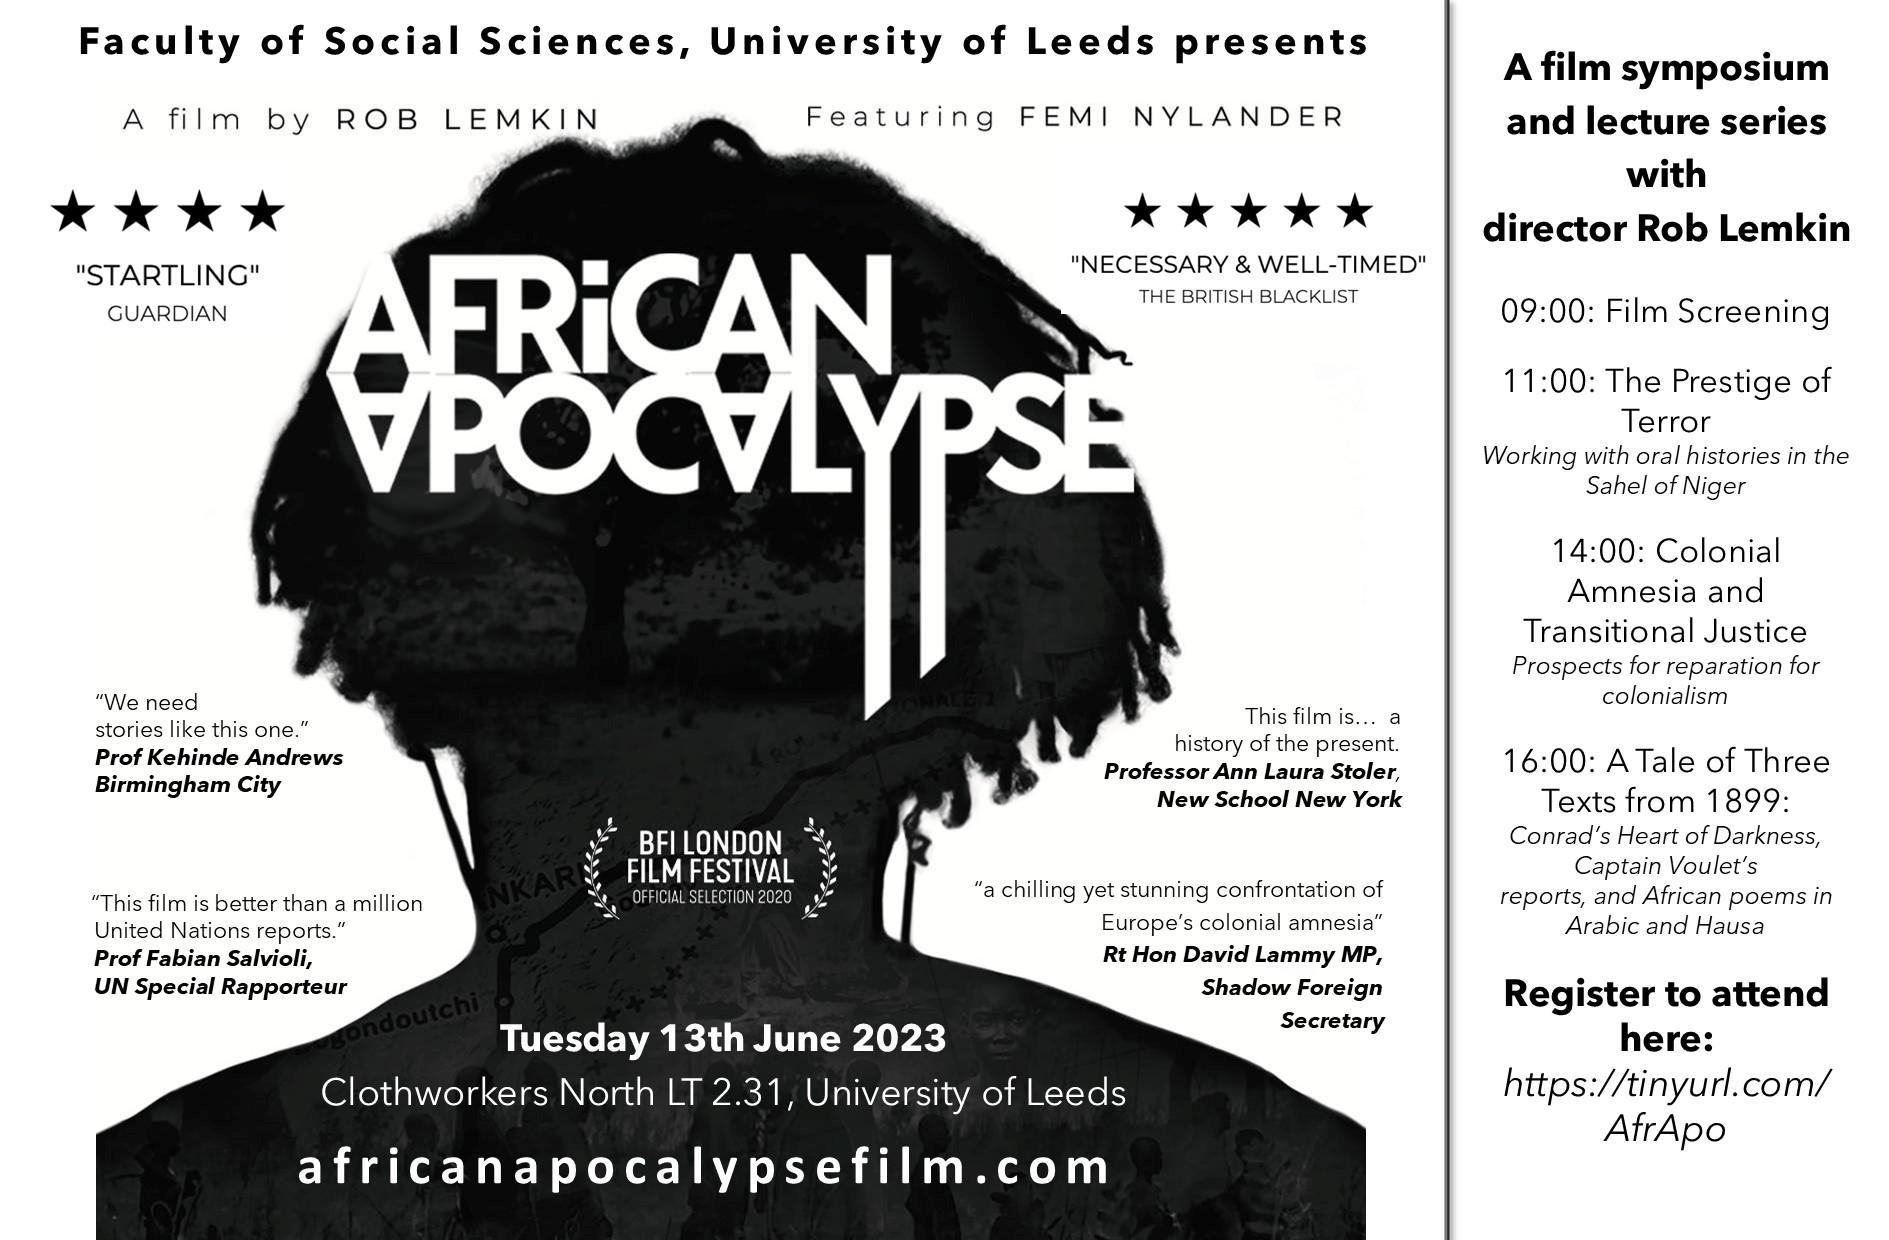 Poster adverting film symposium on African Apocalypse. Full details to be found in the text below.